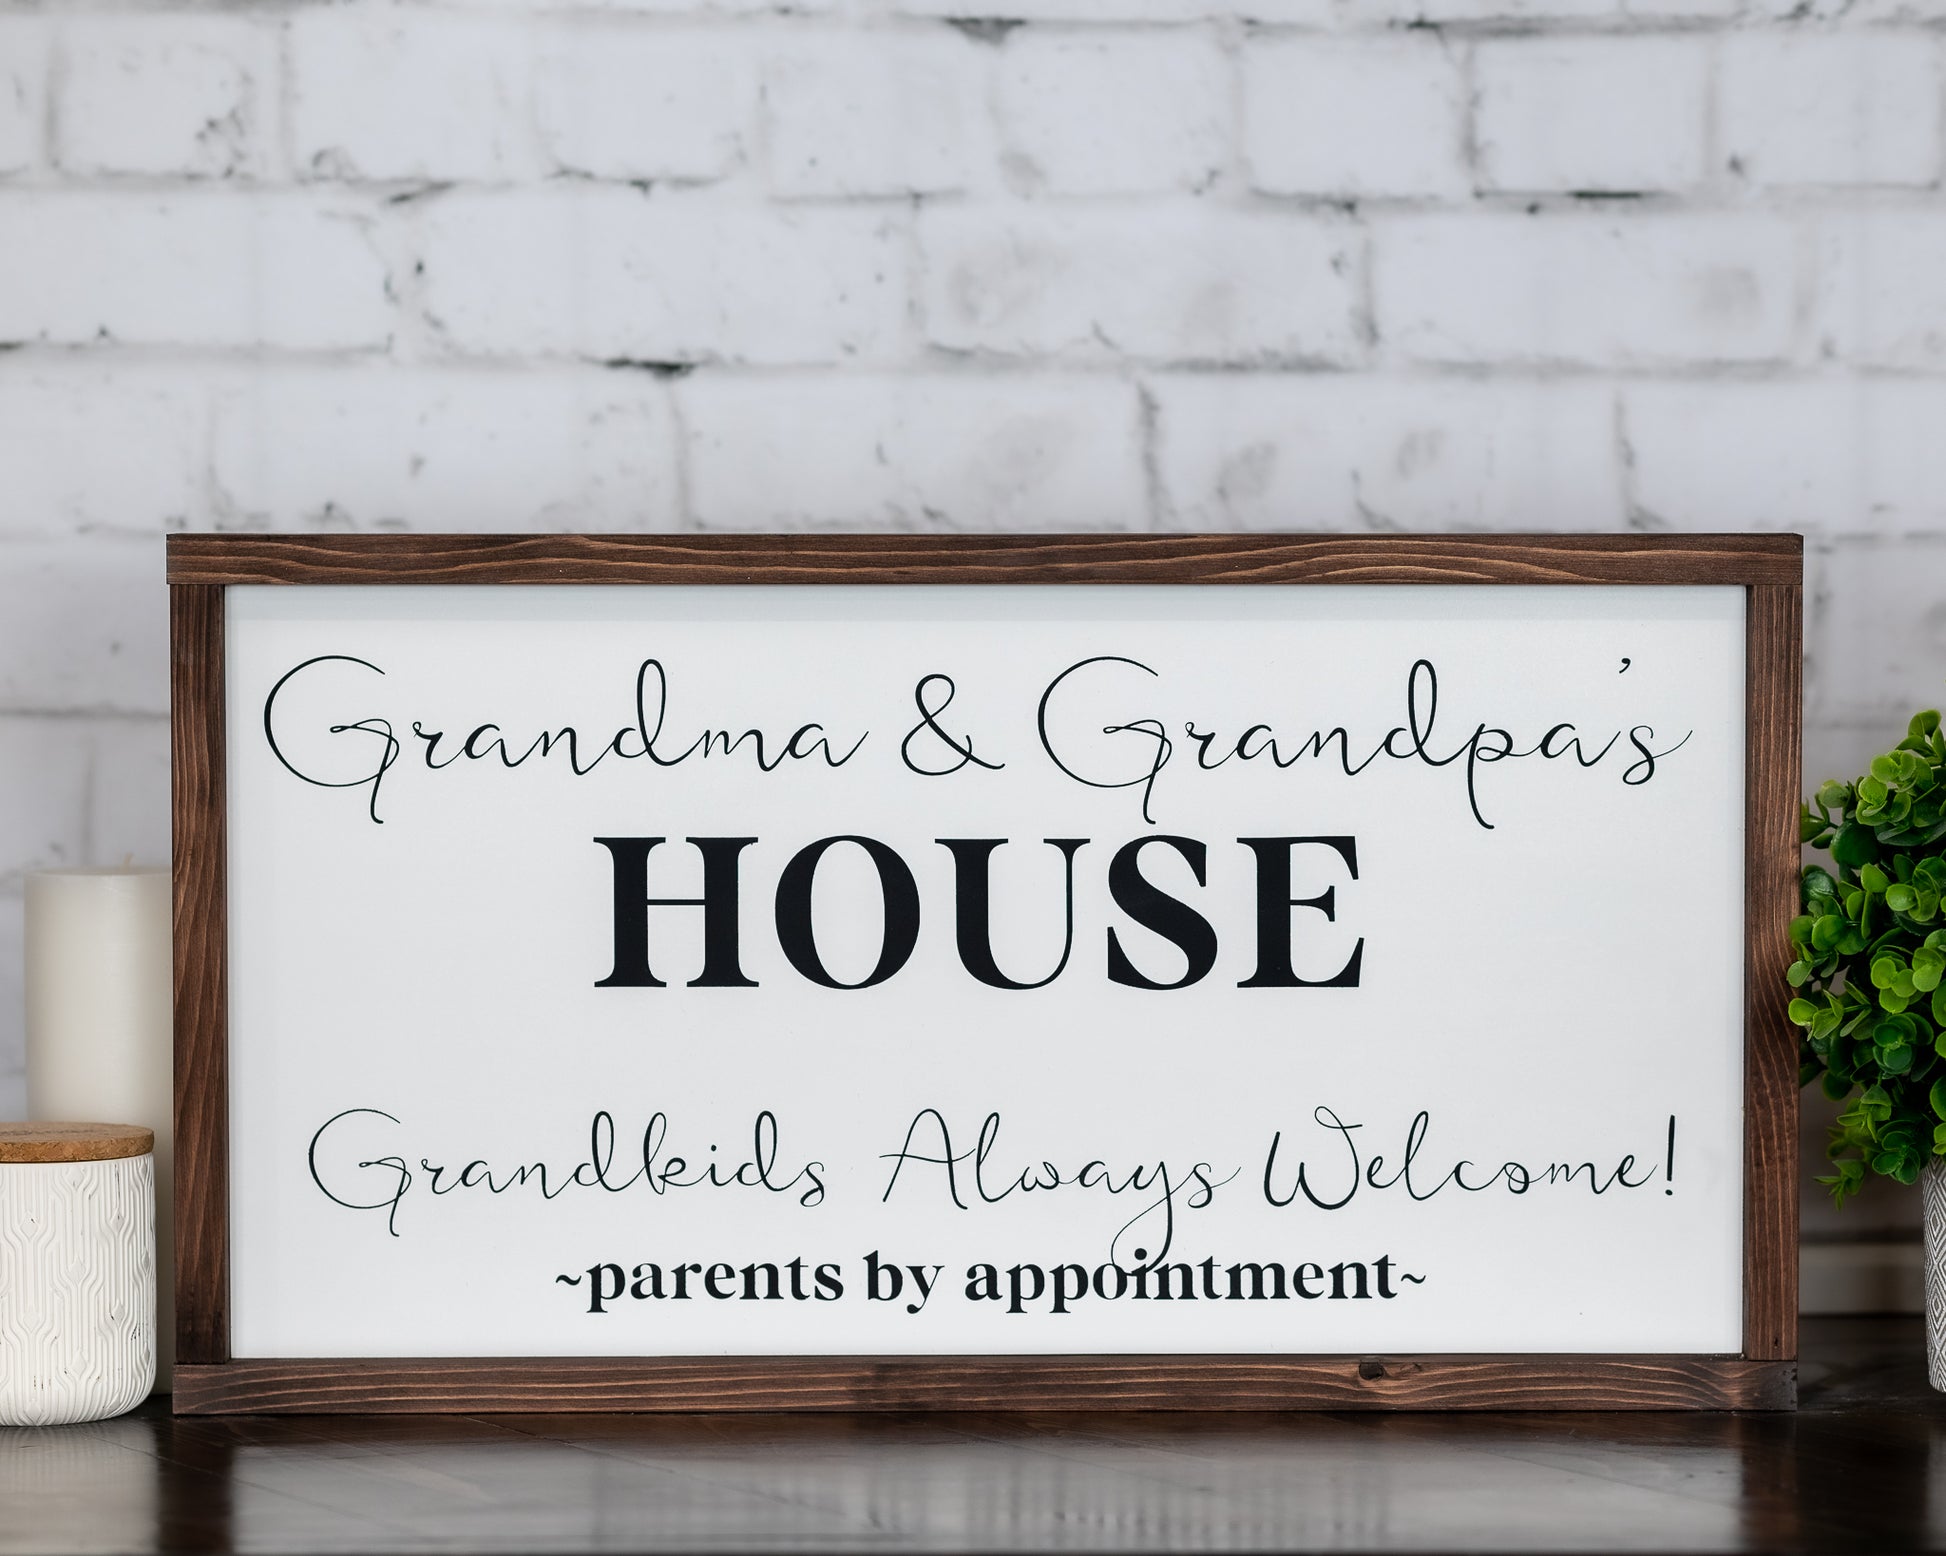 grandma and grandpas house, grandkids always welcome, parents by appointment ~ wood sign